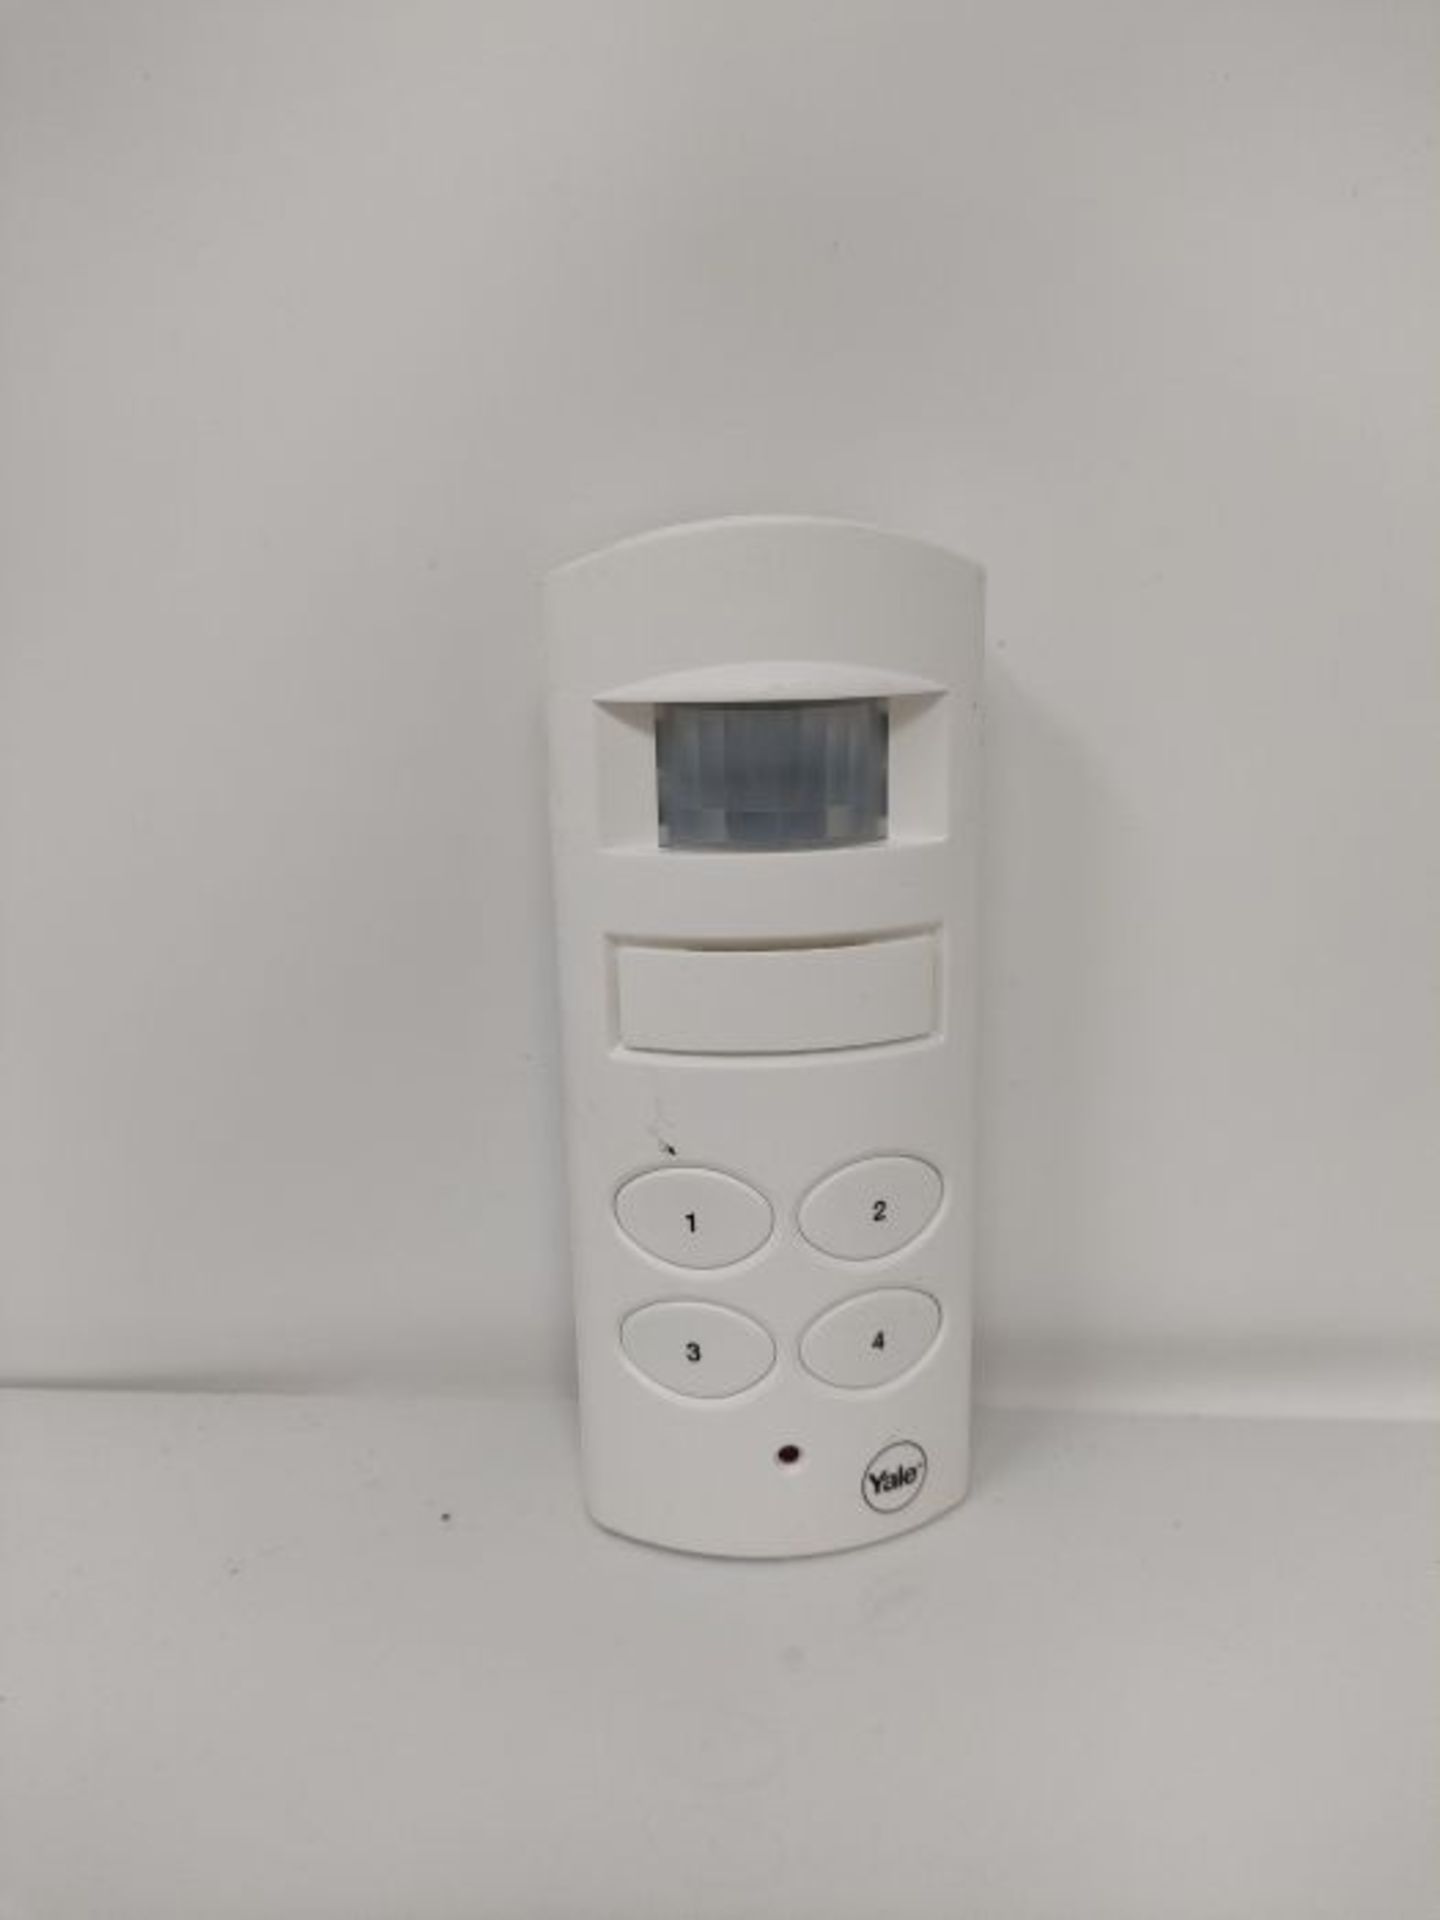 Yale SAA5015 Wireless Shed and Garage Alarm, Free-Standing or Wall-Mounted, 4 Digit Pi - Image 2 of 2